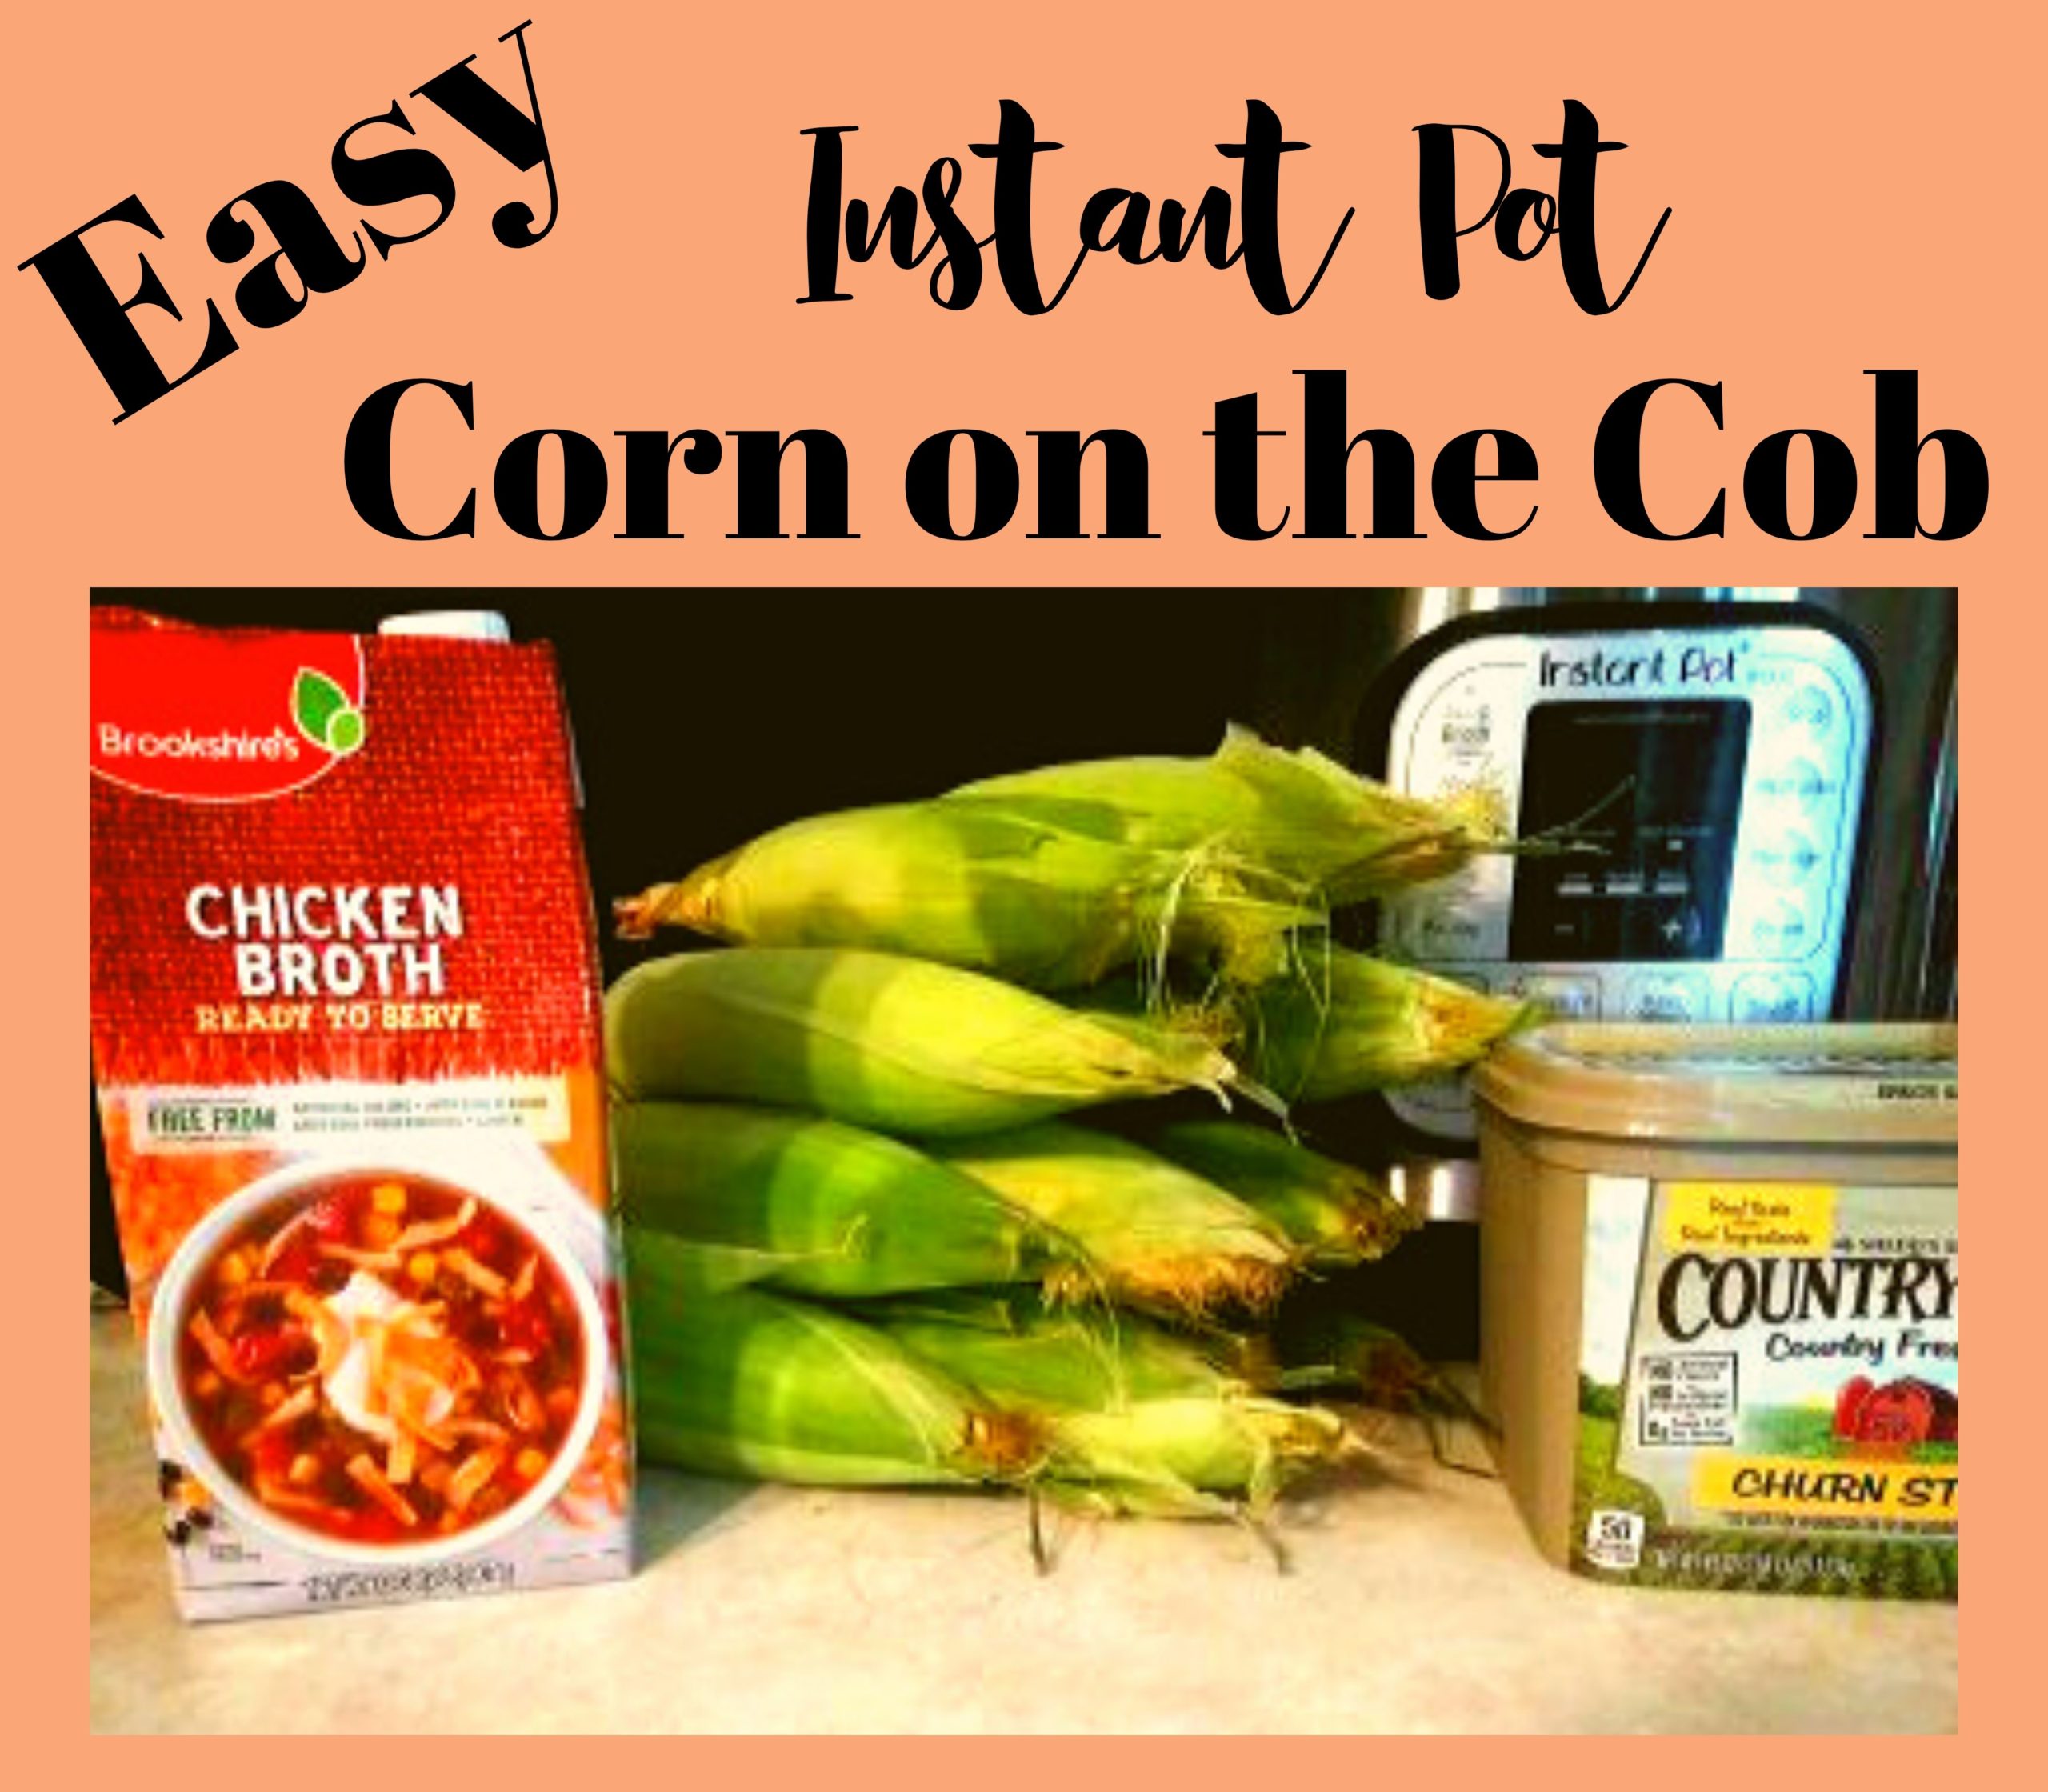 A container of chicken broth, 12 ears of corn in the husk, a container of butter, and an Instant Pot resting on a counter top.